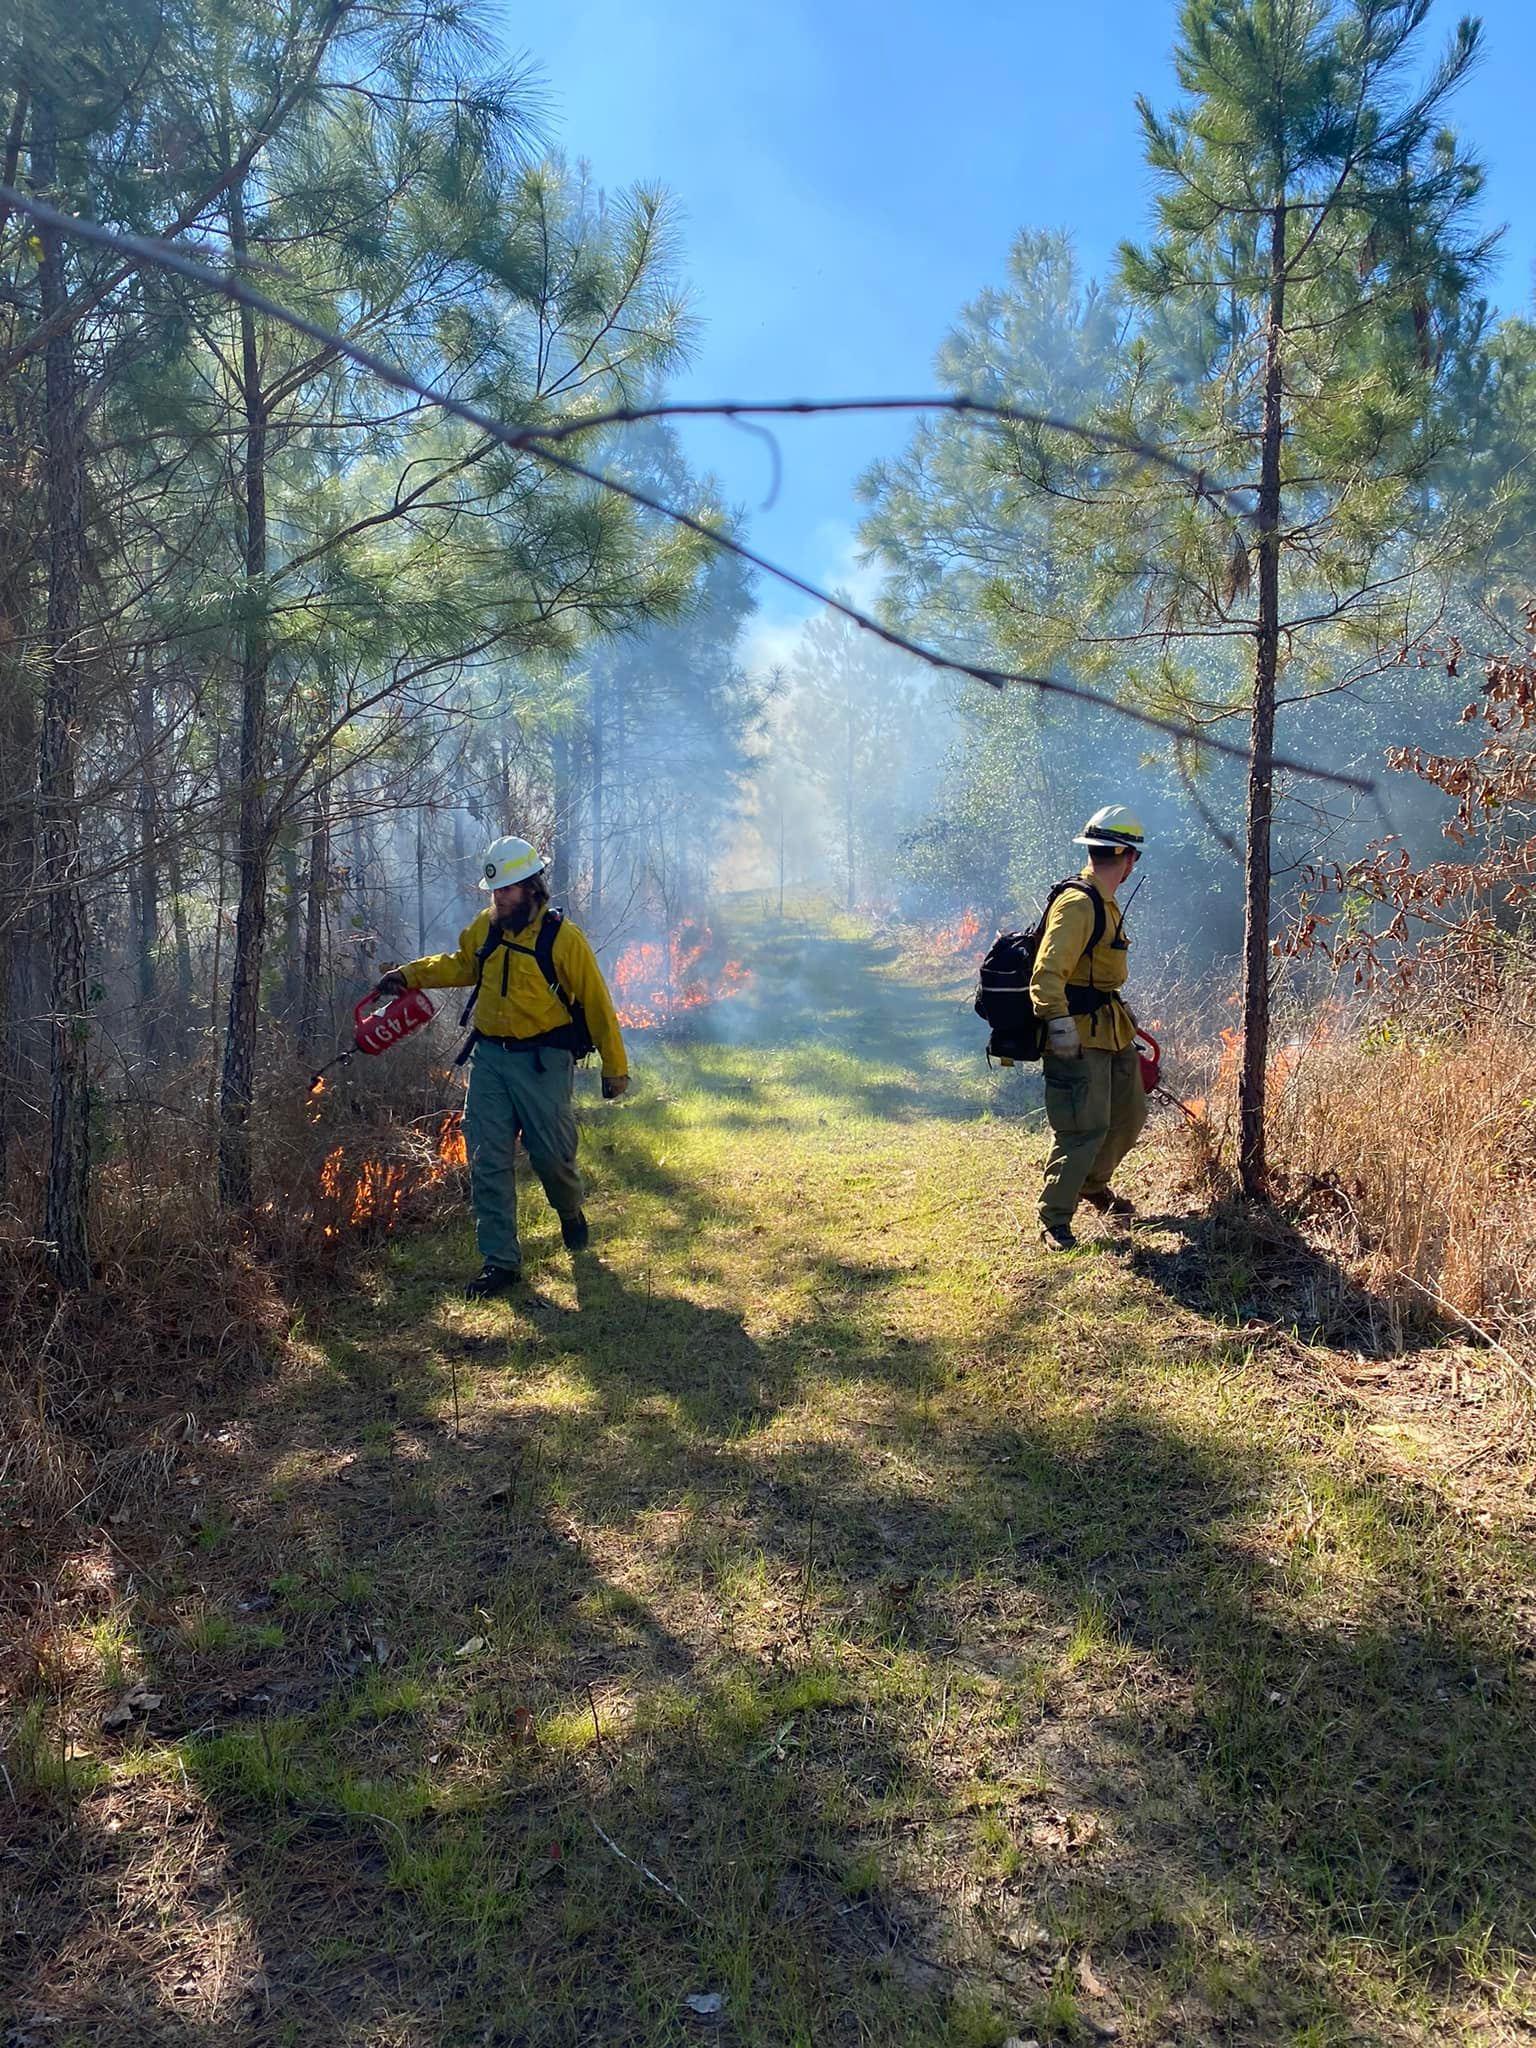 Fireifhgters ignite vegetation during a prescribed fire on February 7, 2022 on the I.D. Fairchild State Forest